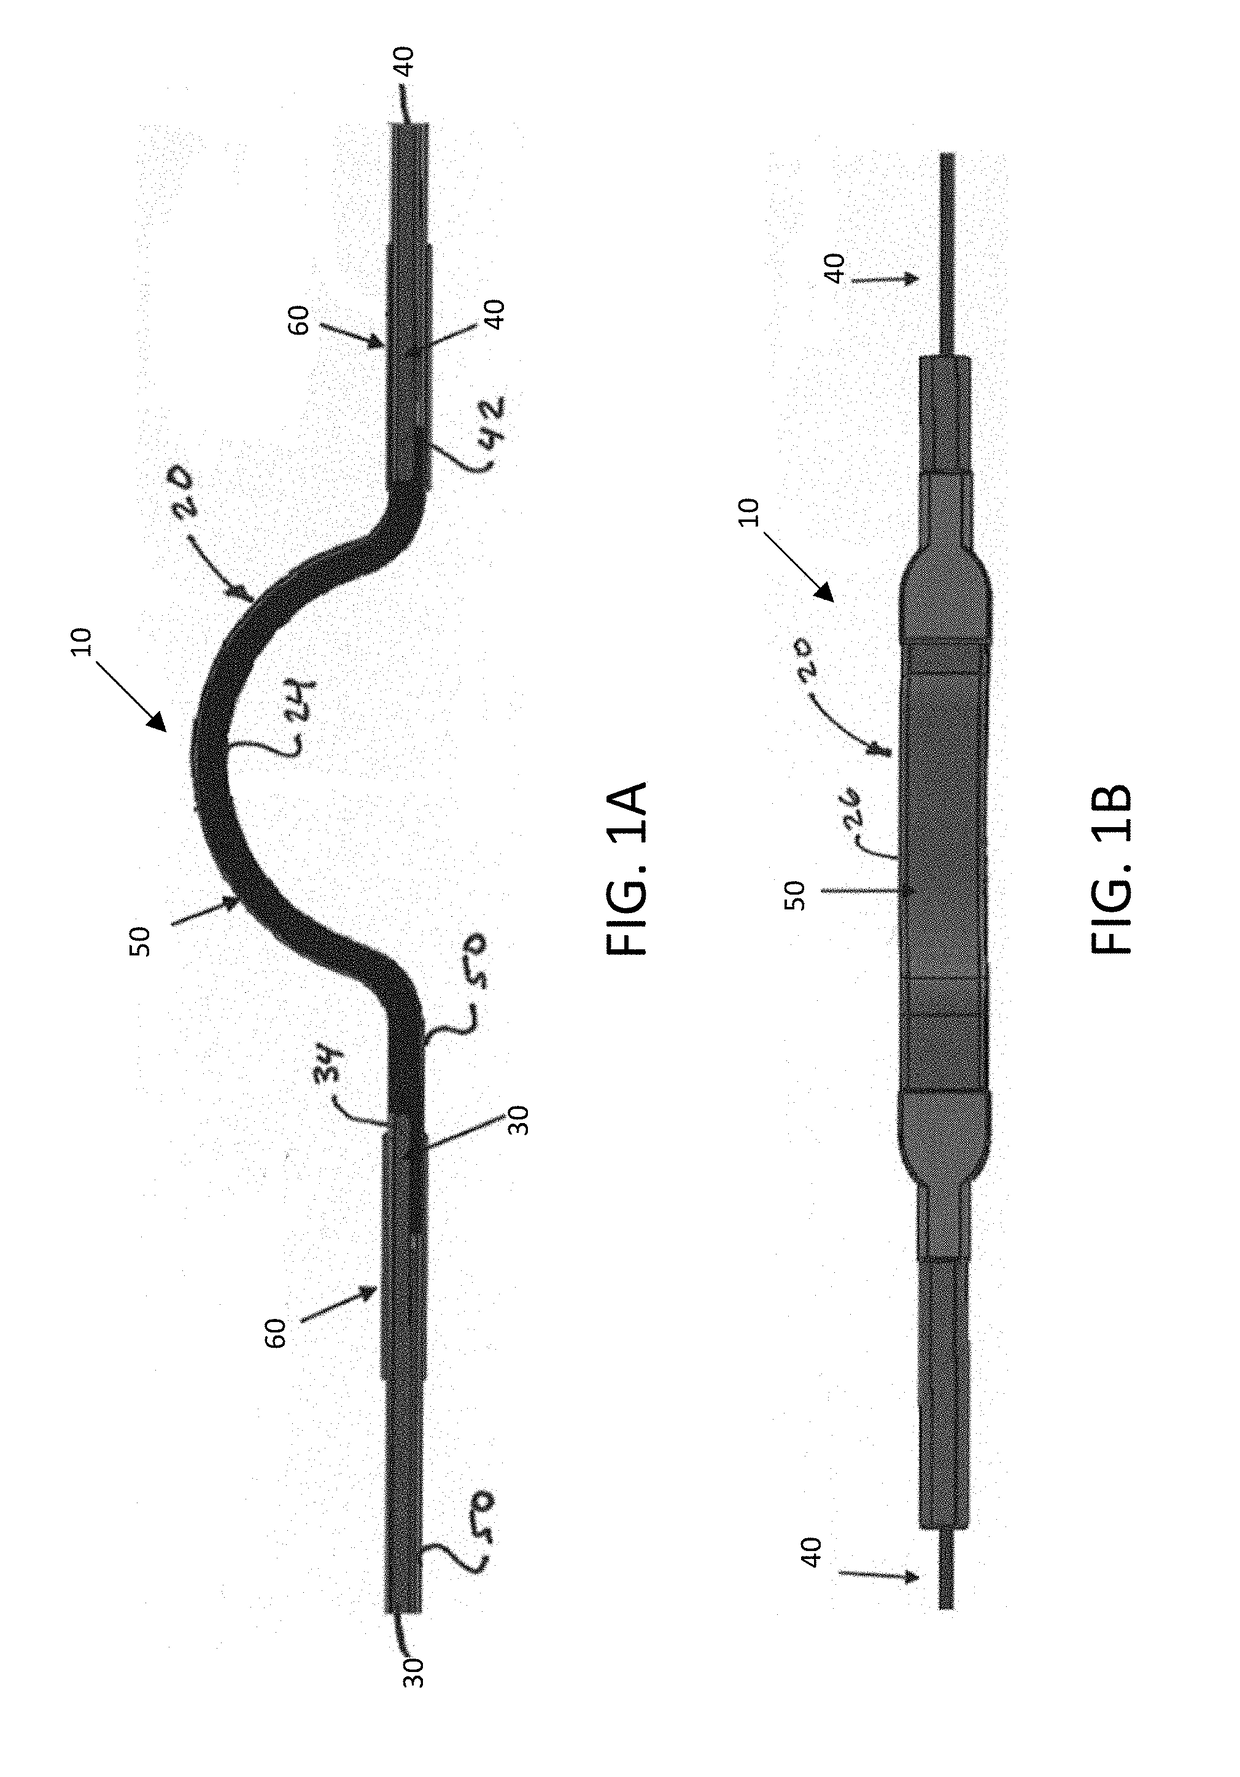 Annuloplasty procedures, related devices and methods